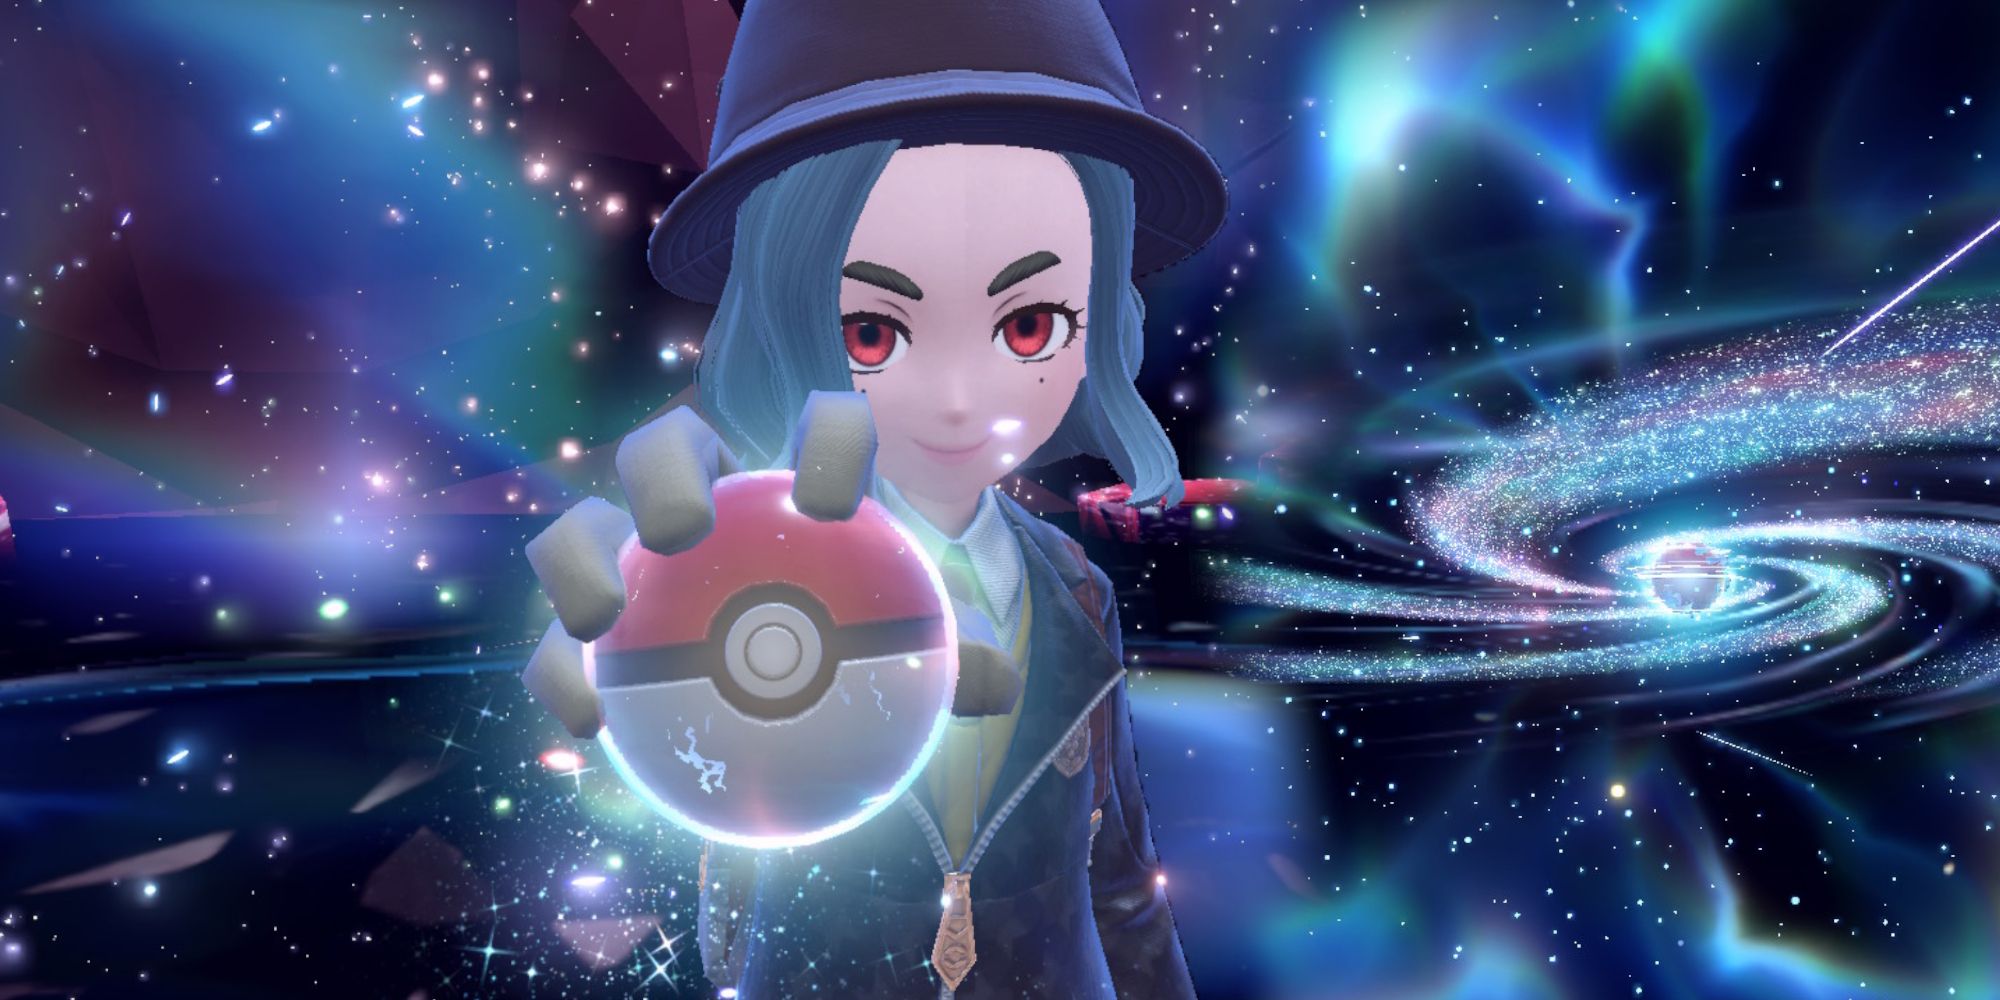 Image of the main character with a Poke Ball in a Tera Raid Battle in Pokemon Scarlet & Violet.